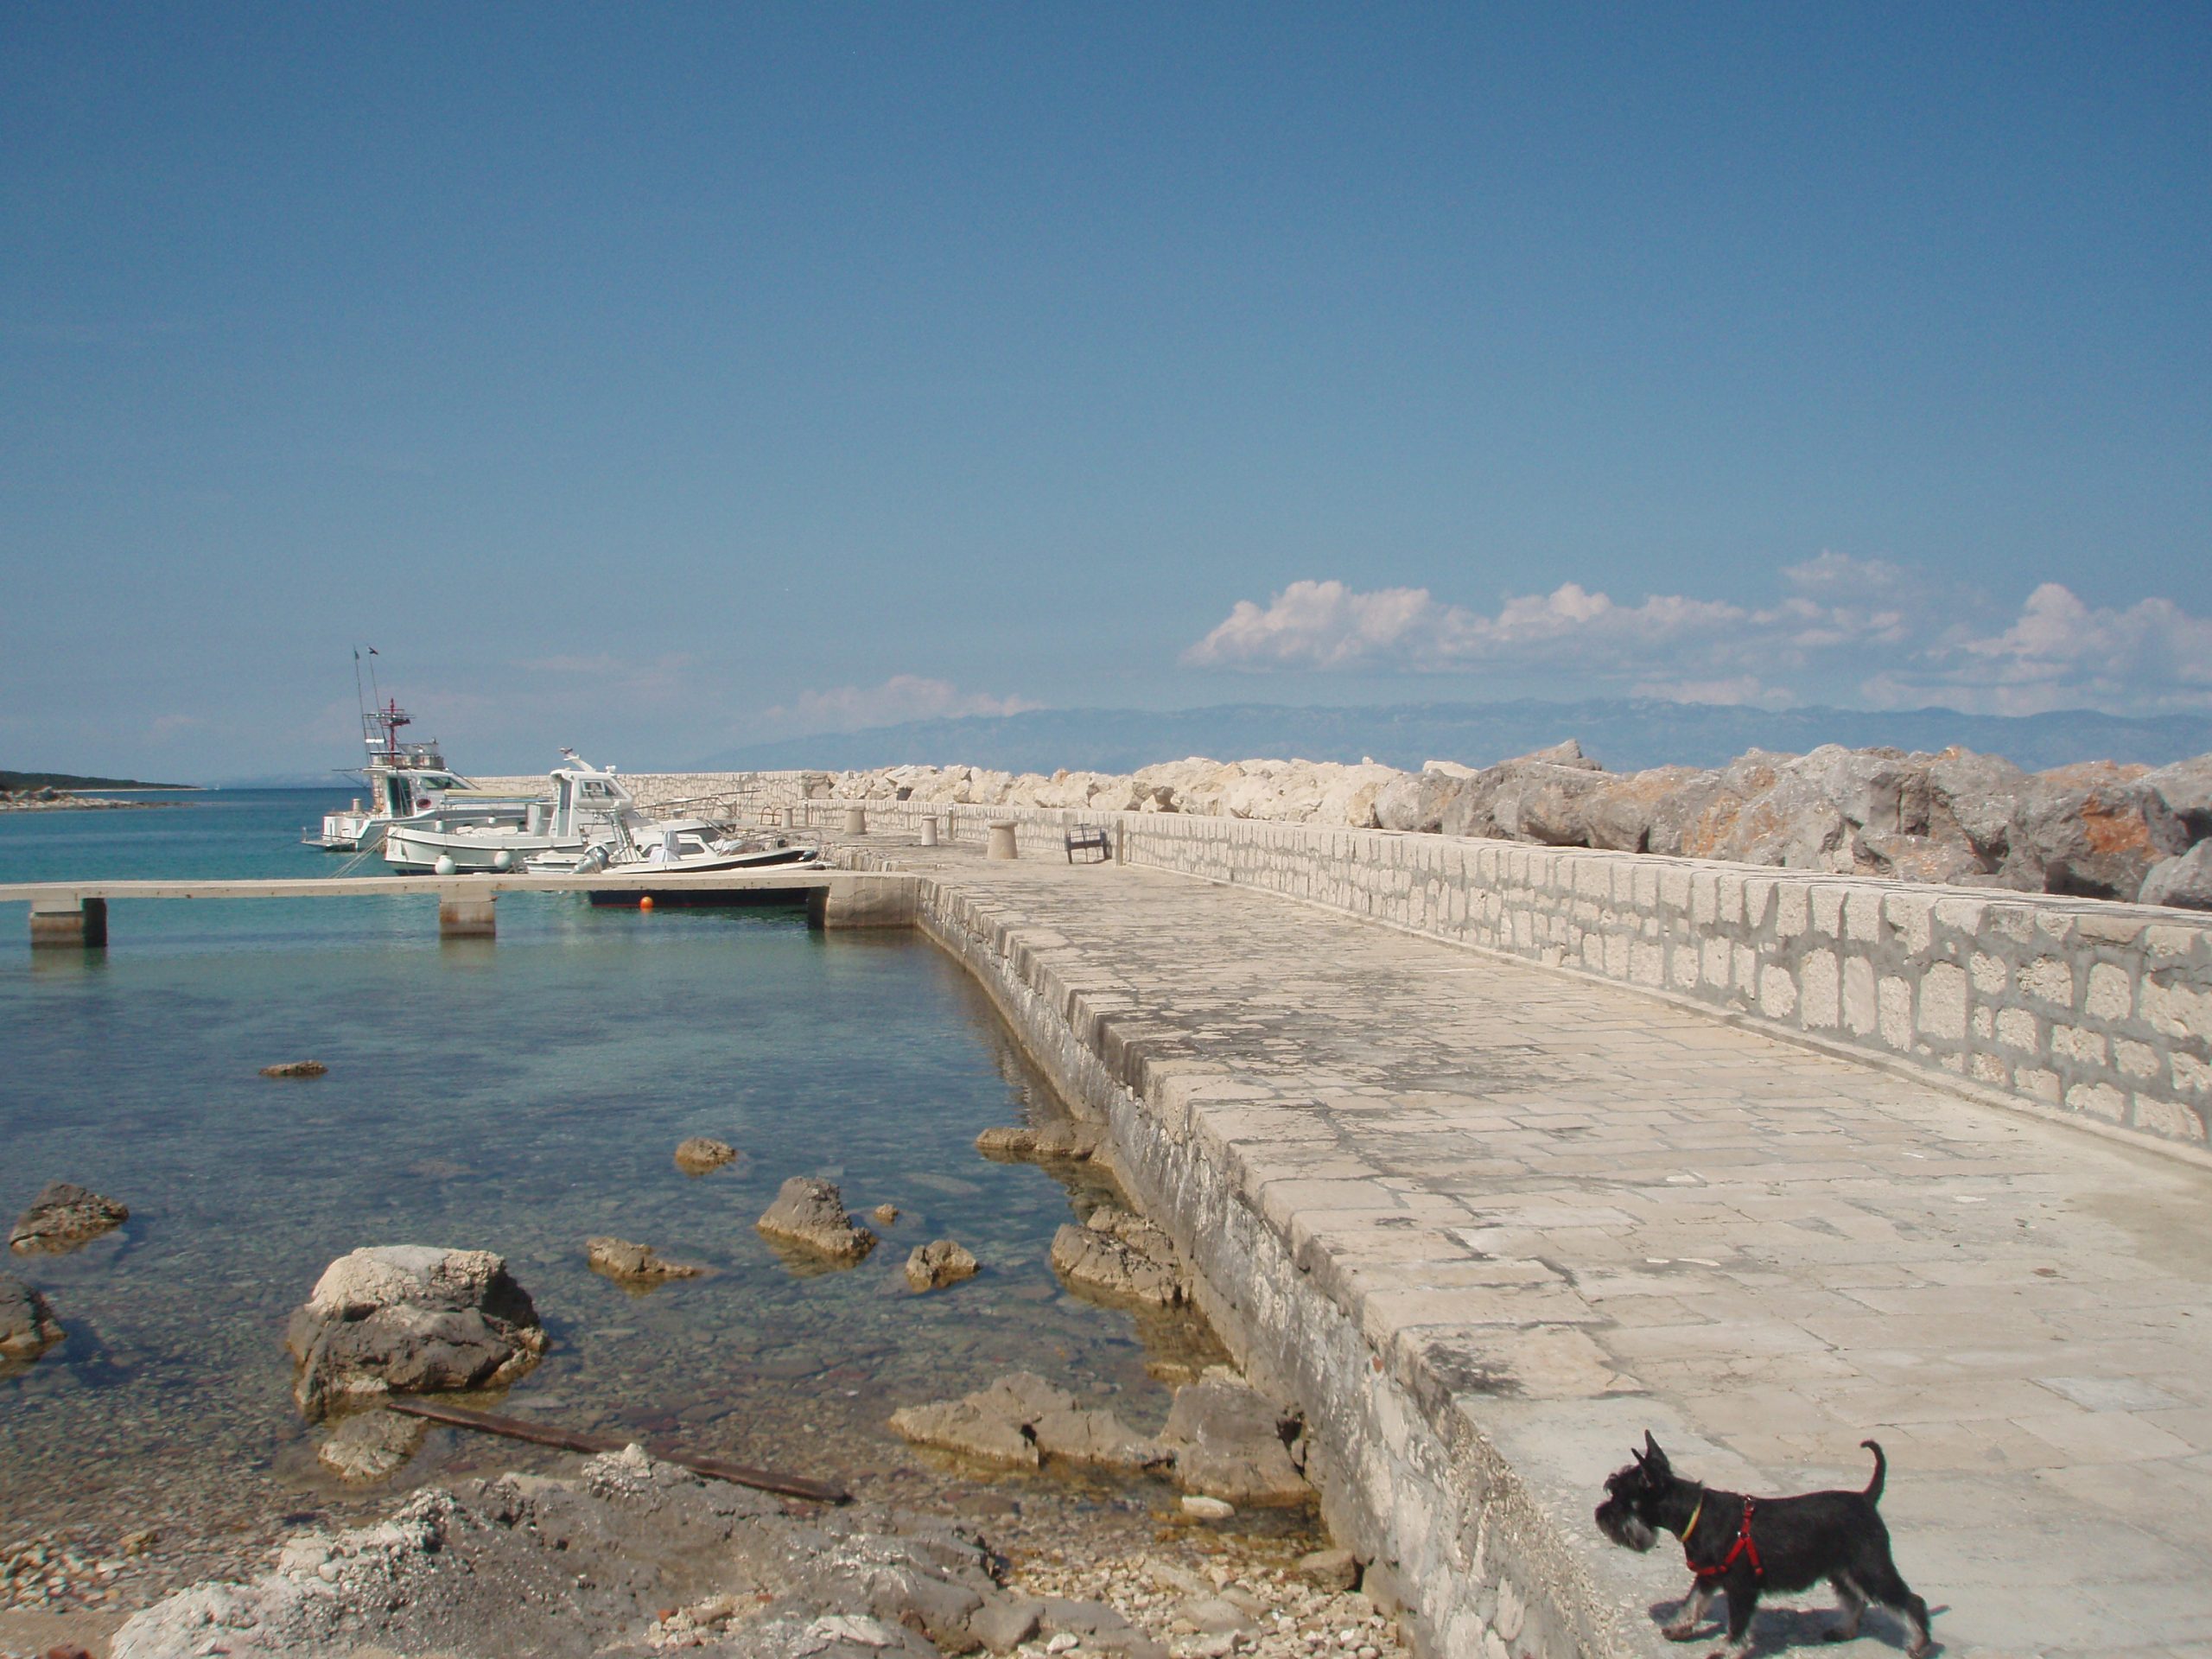 The pier in Silba’s harbour of Mul.